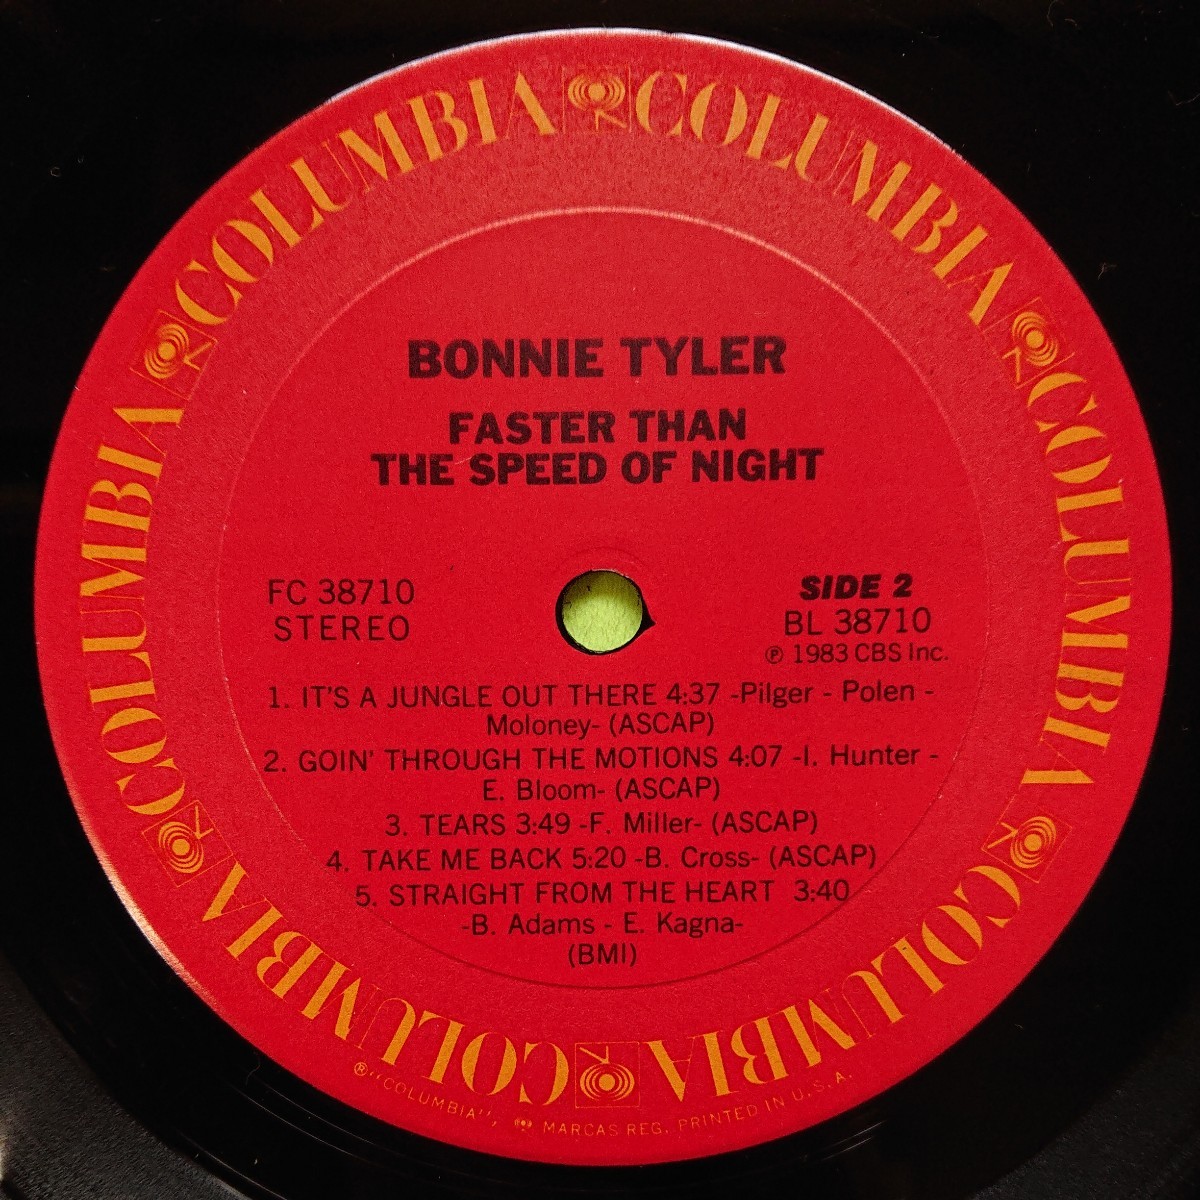 LP(輸入盤)/BONNIE TYLER〈FASTER THAN THE SPEED OF NIGHT〉☆5点以上まとめて（送料0円）無料☆_画像5